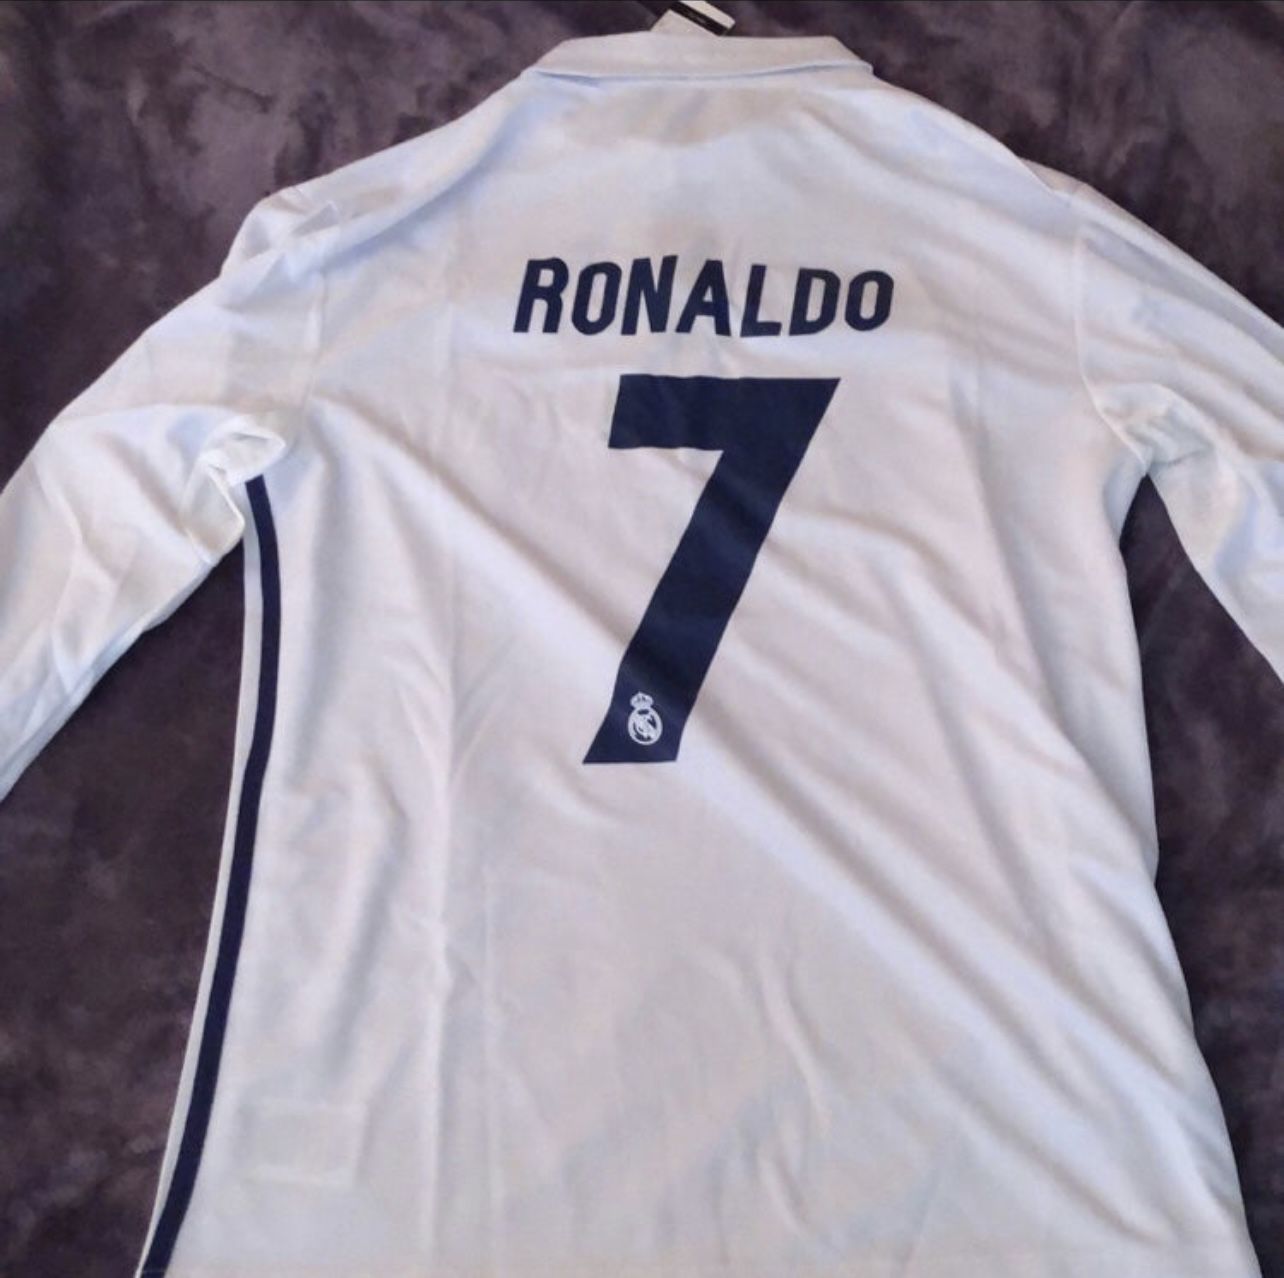 Real Madrid Cristiano Ronaldo long sleeve jersey for Sale in Rockville, MD  - OfferUp